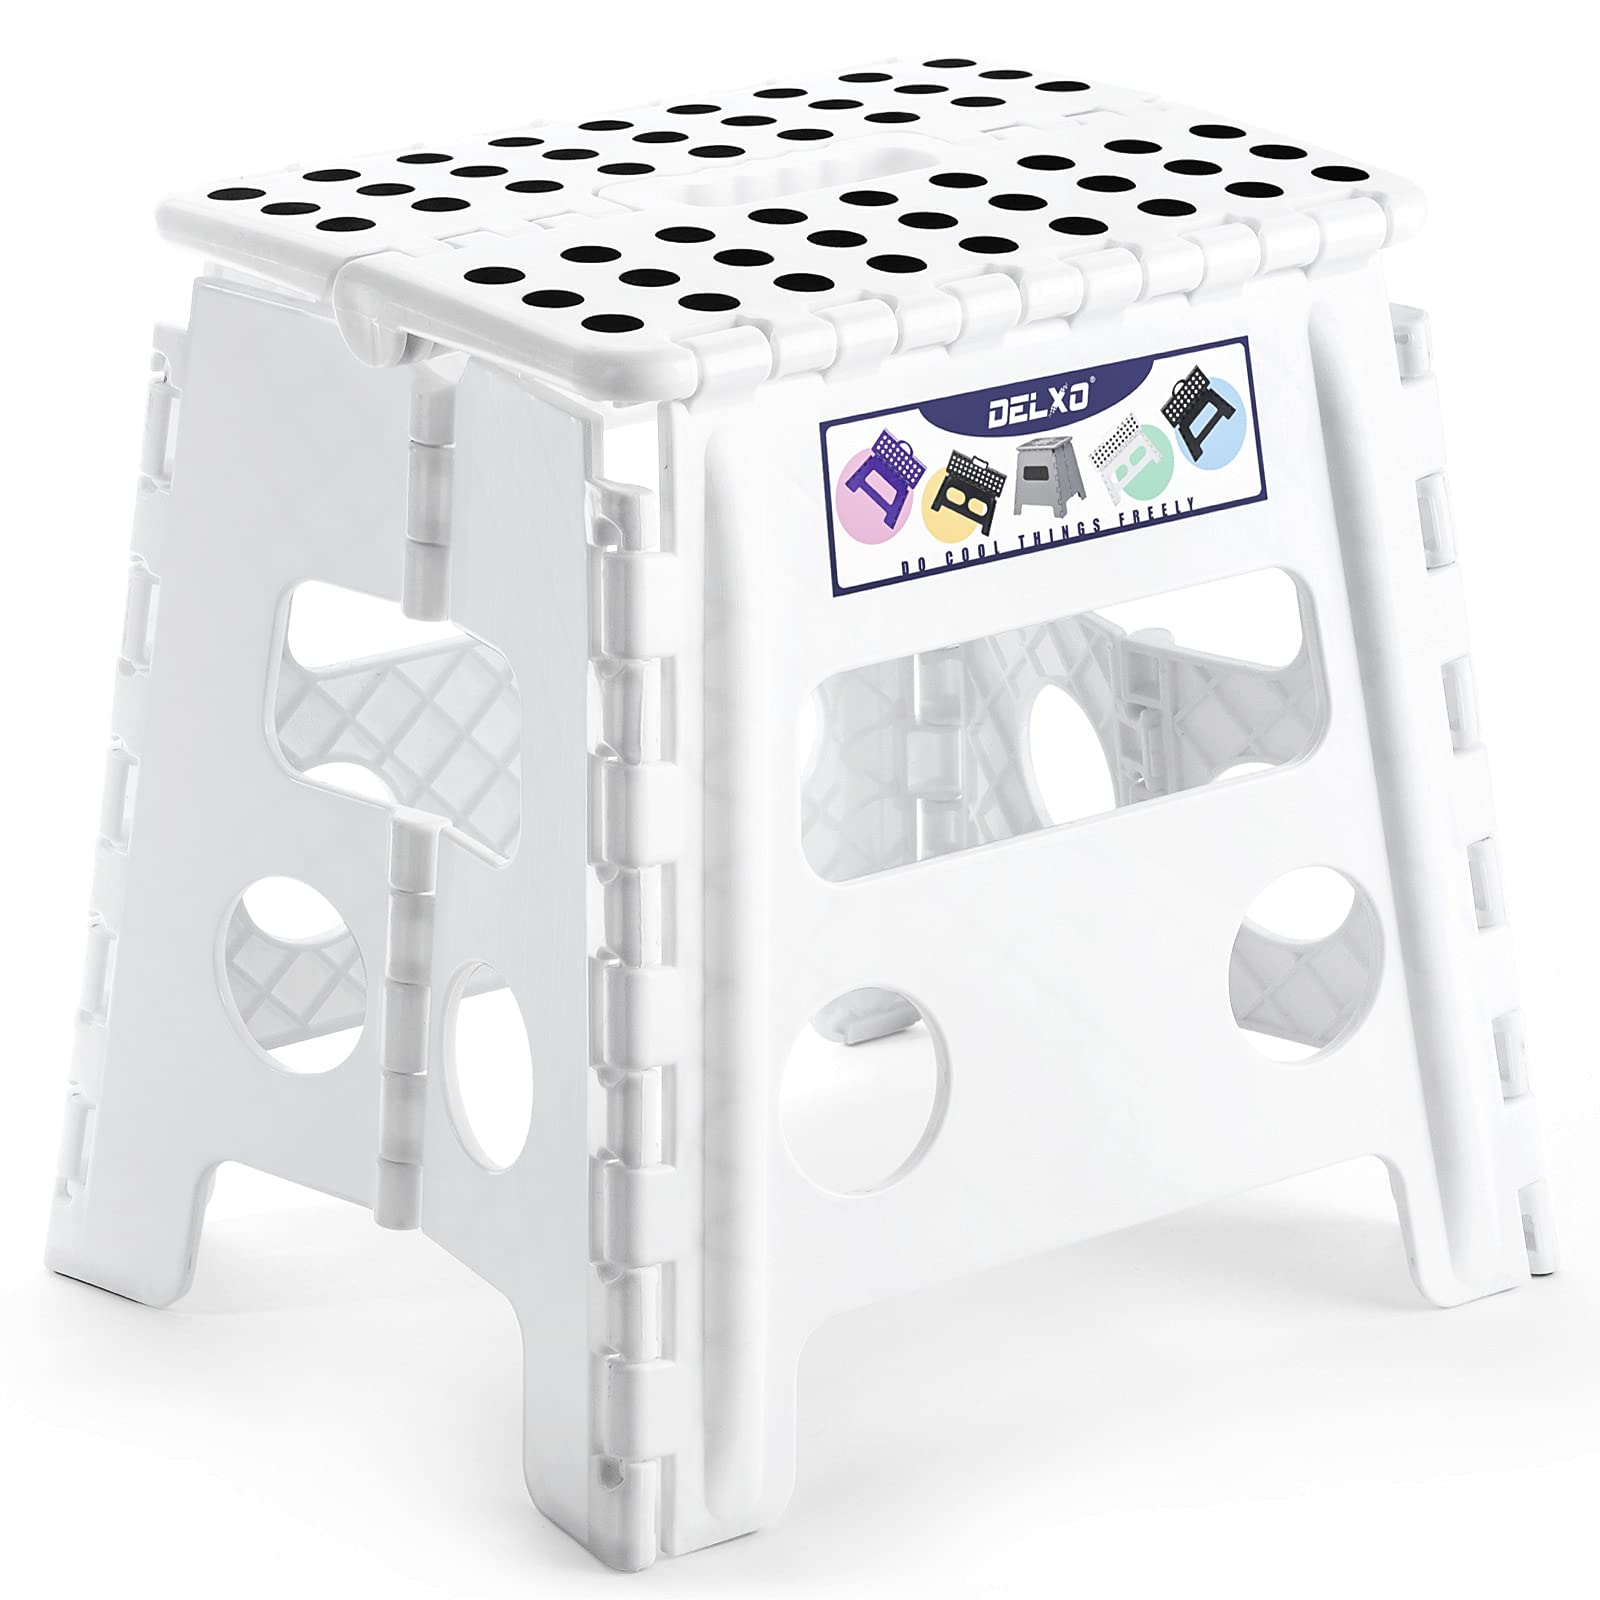 Delxo 13" Folding Step Stool for Kids and Adults, Non-Slip Foldable Step Stools with Handle,Plastic Portable Folding Stool for Bathroom,Bedroom,Kitchen,Hold up to 300lbs White